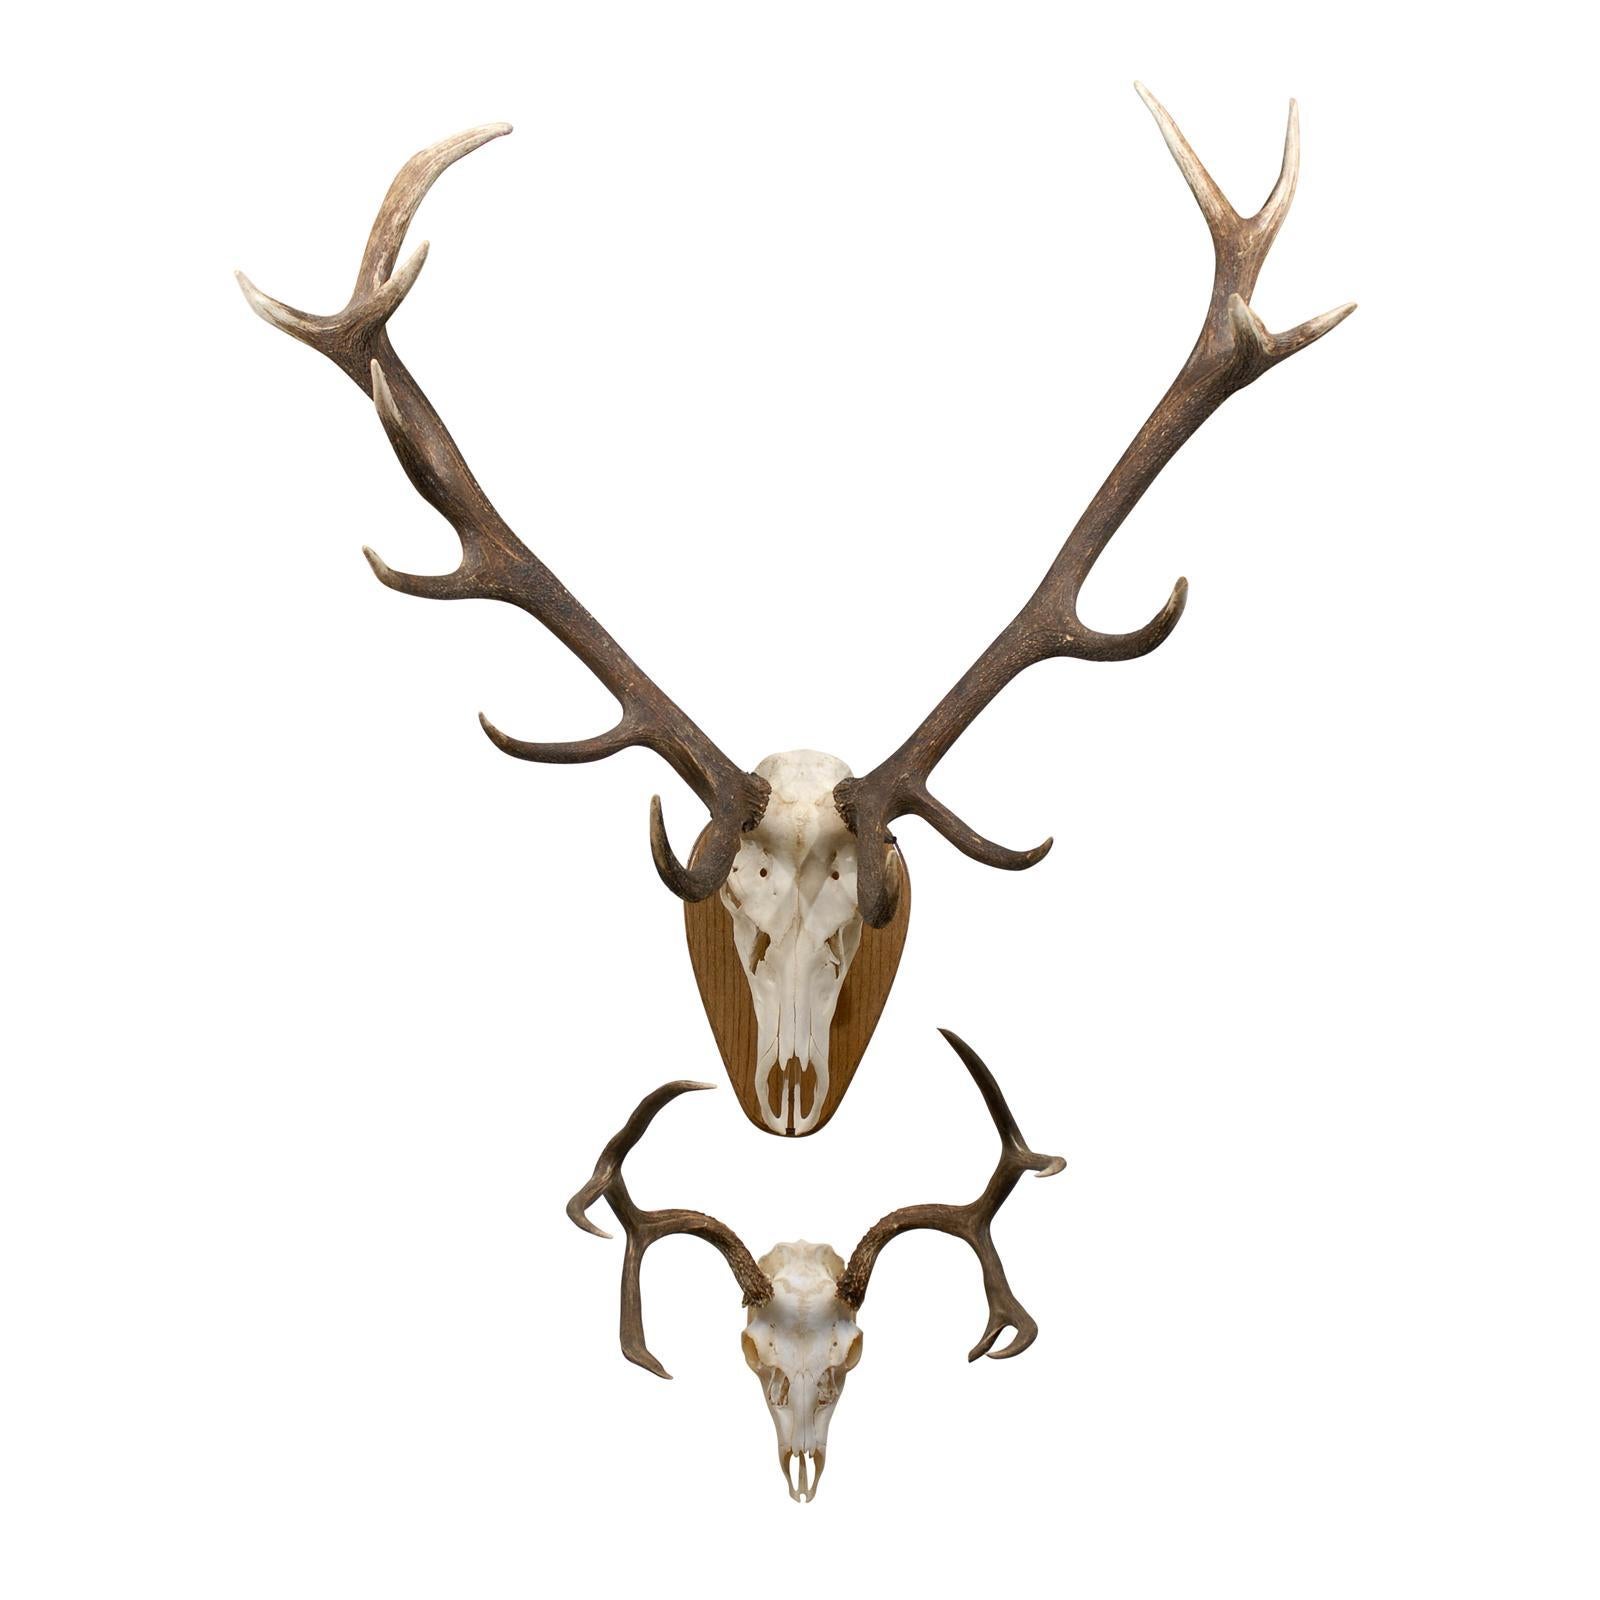 Large Elk Anter Mount on Plaque and White Tail Deer Mount